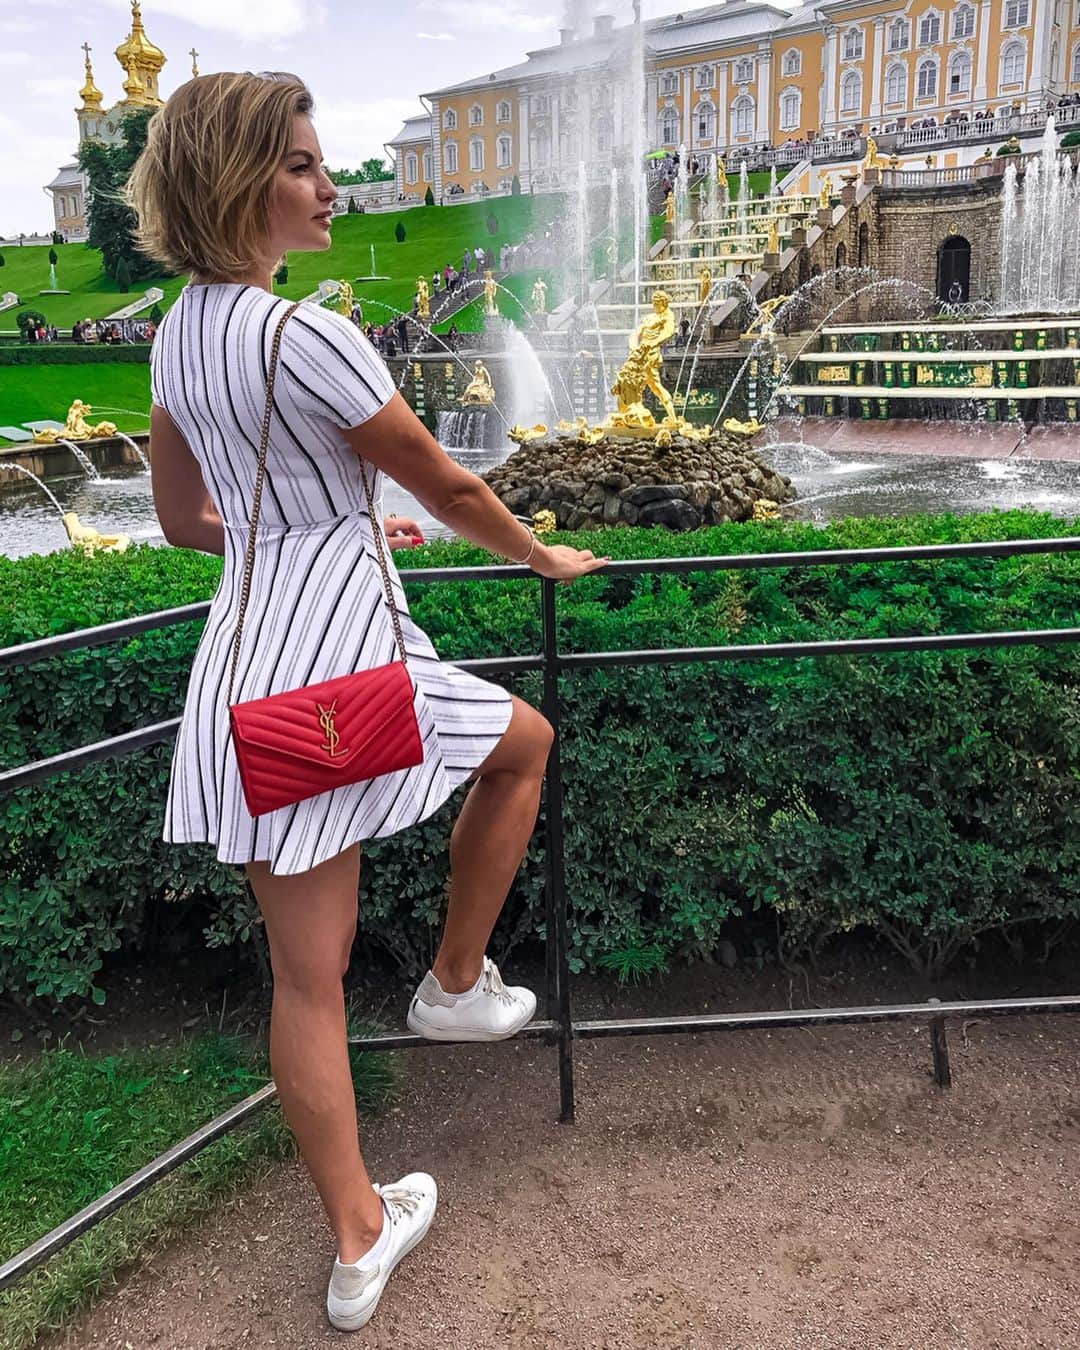 Anna Starodubtsevaさんのインスタグラム写真 - (Anna StarodubtsevaInstagram)「I have to share this place with you guys and you have to visit it one day 😍. ⠀ Welcome to Peterhof, Saint Petersburg where you can find beautiful palaces, gardens and fountains. We call it Russian Versal ,as it was commissioned by Peter the Great as a direct response to the Palace of Versailles. ⠀ ⠀ I have traveled a lot and had seen many beautiful places,but this one made my heart stop for a sec. ⠀ It’s my very first time here and I was speechless. It would be very selfish not to tell you guys about it. If you ever visit St.Petersburg you have to include this spot in your itinerary, I promise you won’t regret 💞😃. ⠀ 🇷🇺🇷🇺🇷🇺. ⠀ Петергоф заставил мое сердце остановиться на мгновение 😍. ⠀ Такой красоты я увидеть не ожидала. Это,однозначно, одно из самых красивых и запоминающихся мест в моем списке. ⠀ Погода была шикарная до тех пор пока не ливанул дождь и пришлось стоять под деревом ибо зонта то нет конечно же 😂, зачем он в Питере 🤷‍♀️.Однако,в тот момент он был и не нужен,ибо это был безумно романтичный момент,когда пережидаешь дождь под деревом, и мокрый насквозь и улыбка на лице, а потом, когда дождь закончился, ты смотришь на воду а там невероятной красноты радуга и ты ещё больше улыбаешься и просто хорошо... и захотелось остановить время и побыть там ещё чуток... ⠀ #anyastar_путешествия #путешествия #люблюпутешествовать #travel #lovetotravel #livetotravel #traveltheworld #travelwithme」8月13日 18時38分 - anyastar